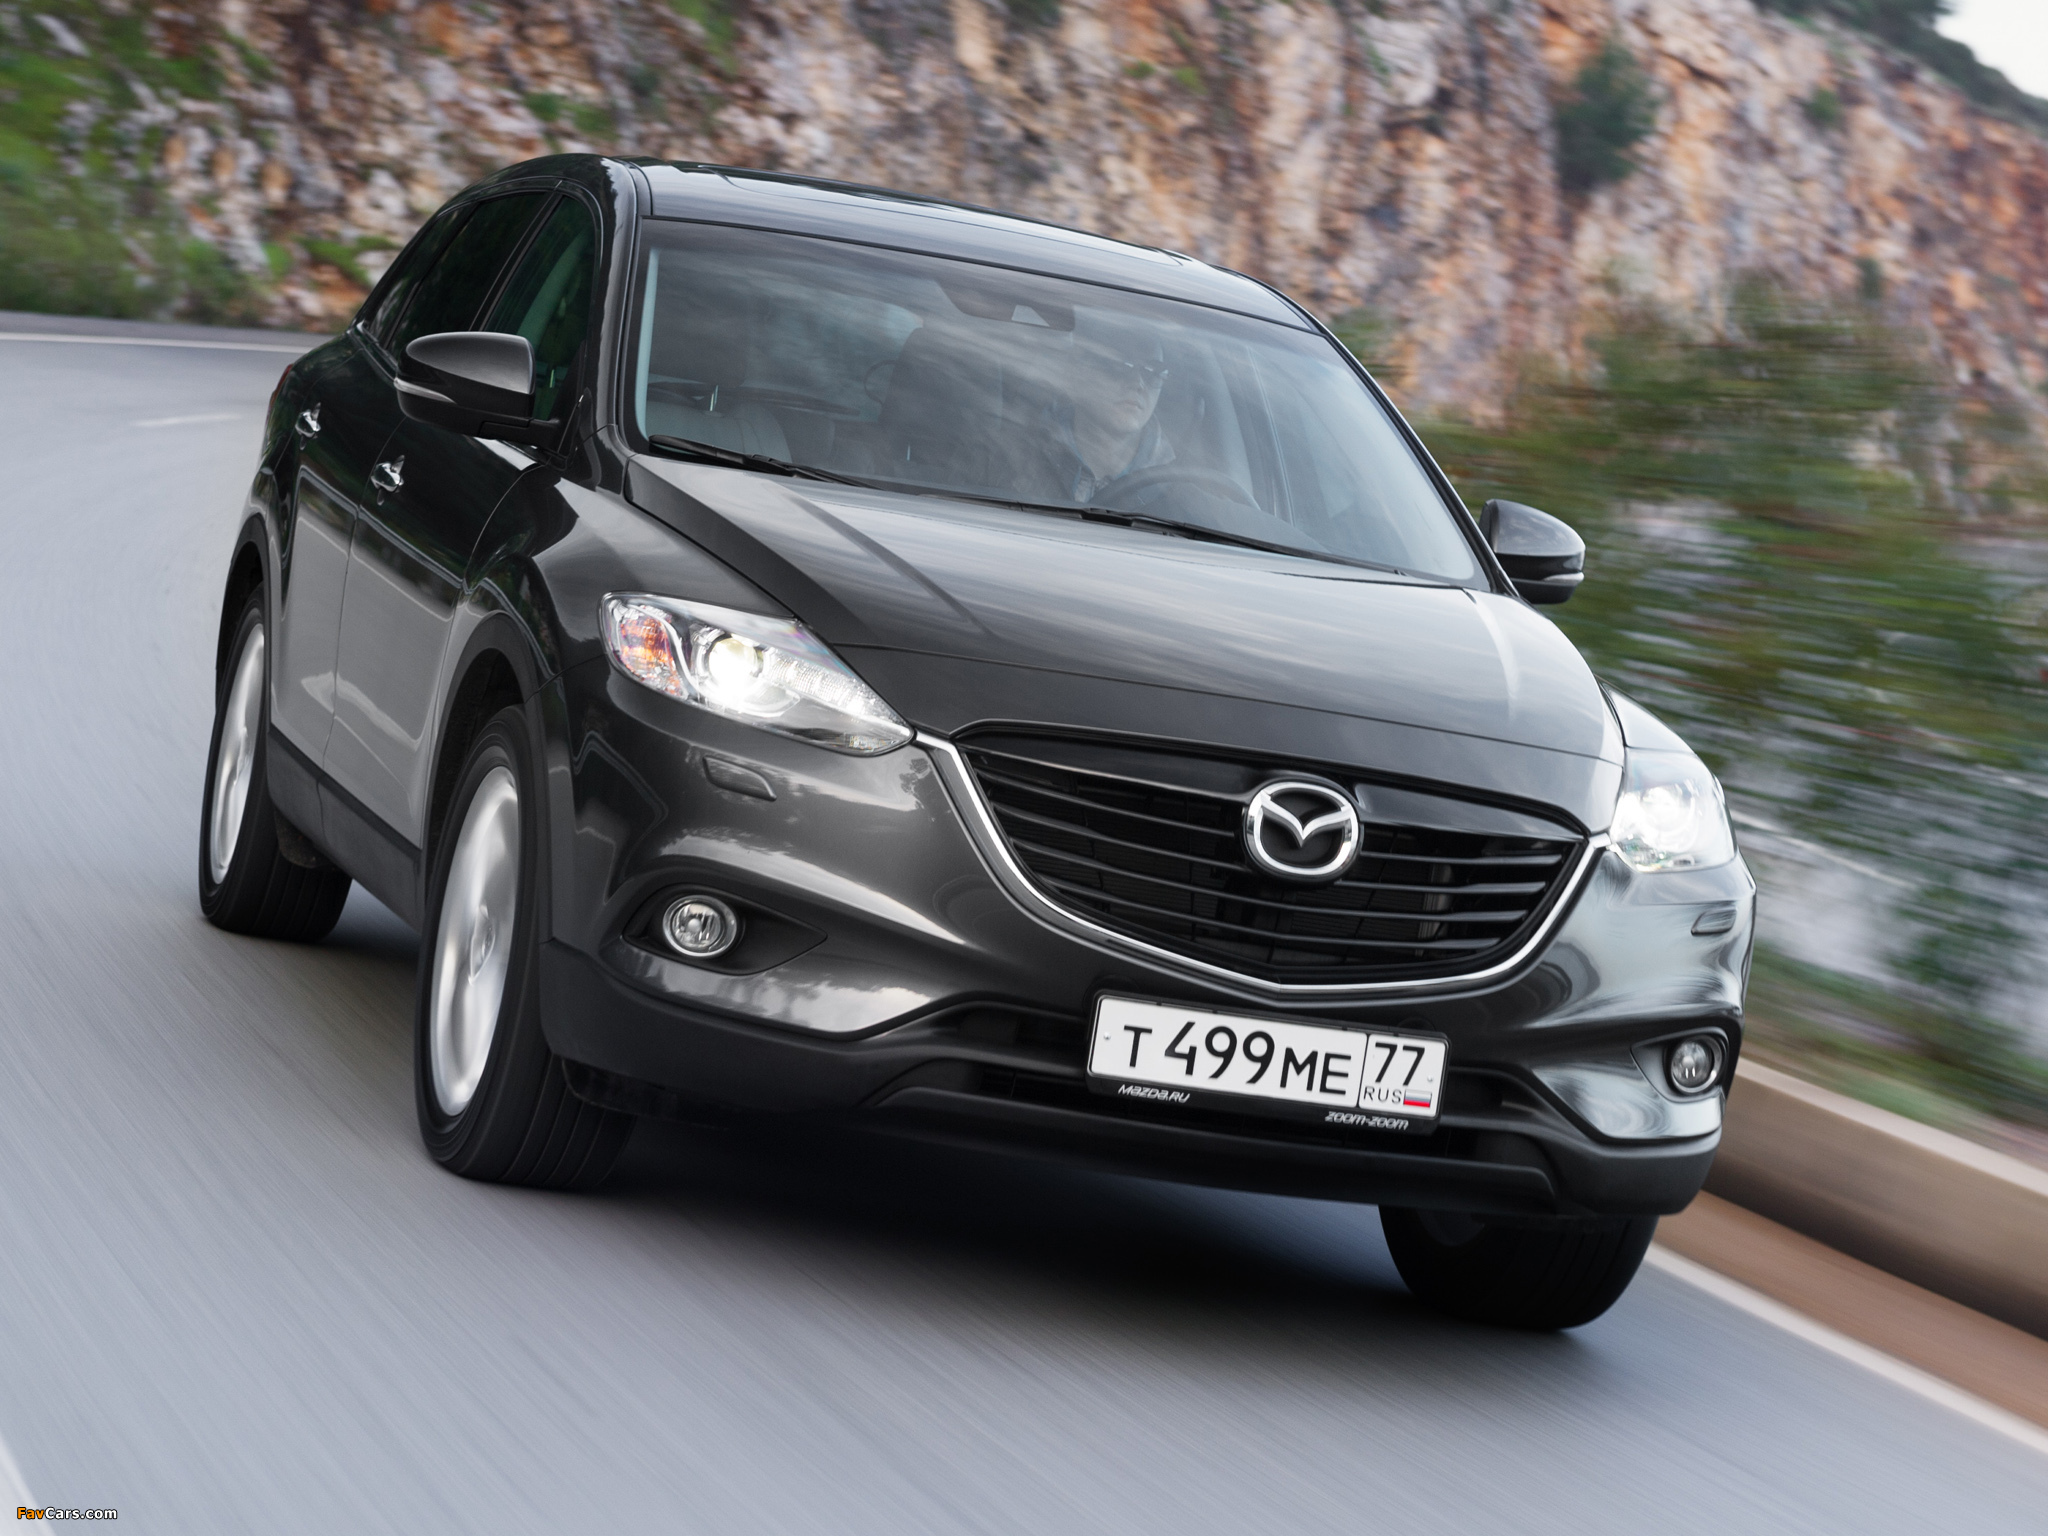 Mazda CX-9 2013 wallpapers (2048 x 1536)